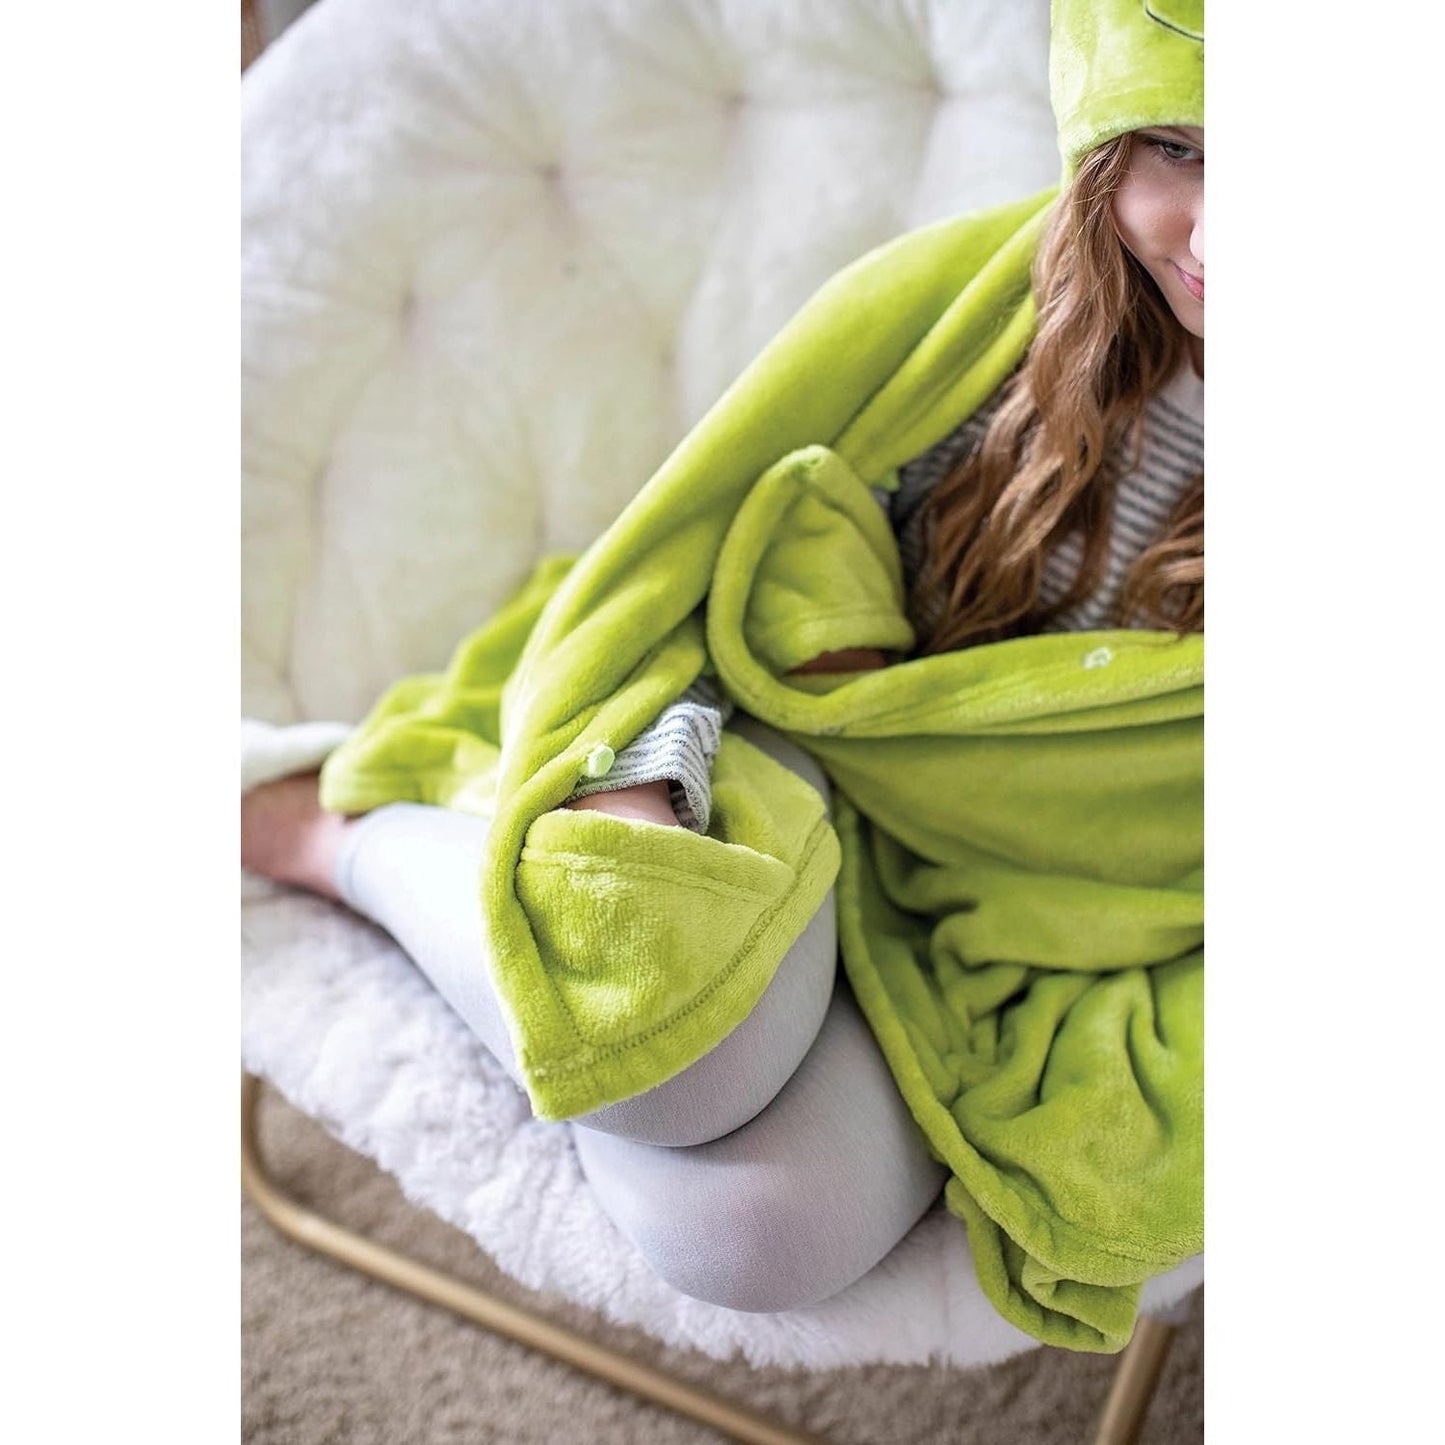 Department 56 Snowpinions Snow Throw The Grinch Super Soft Fleece Hooded Blanket, 45x60